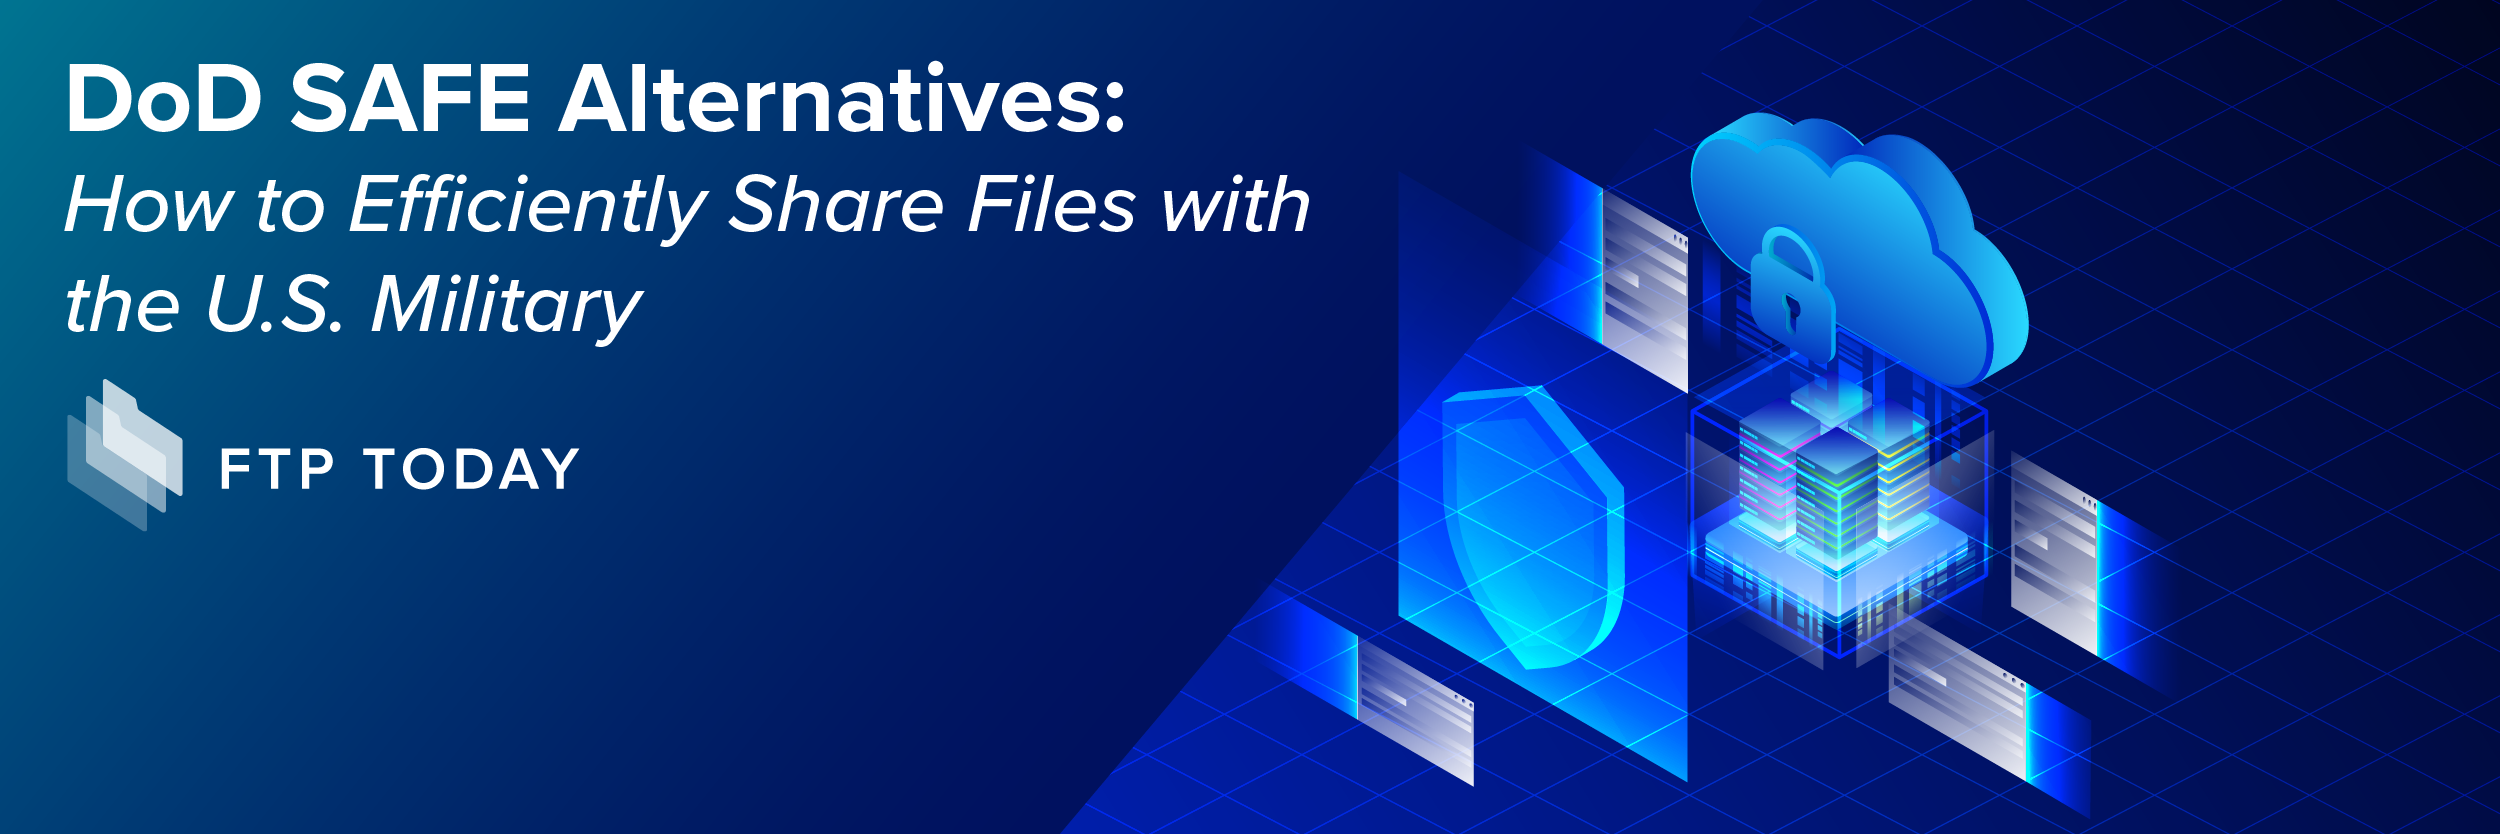 DoD SAFE Alternatives: How to Efficiently Share Files with the U.S. Military